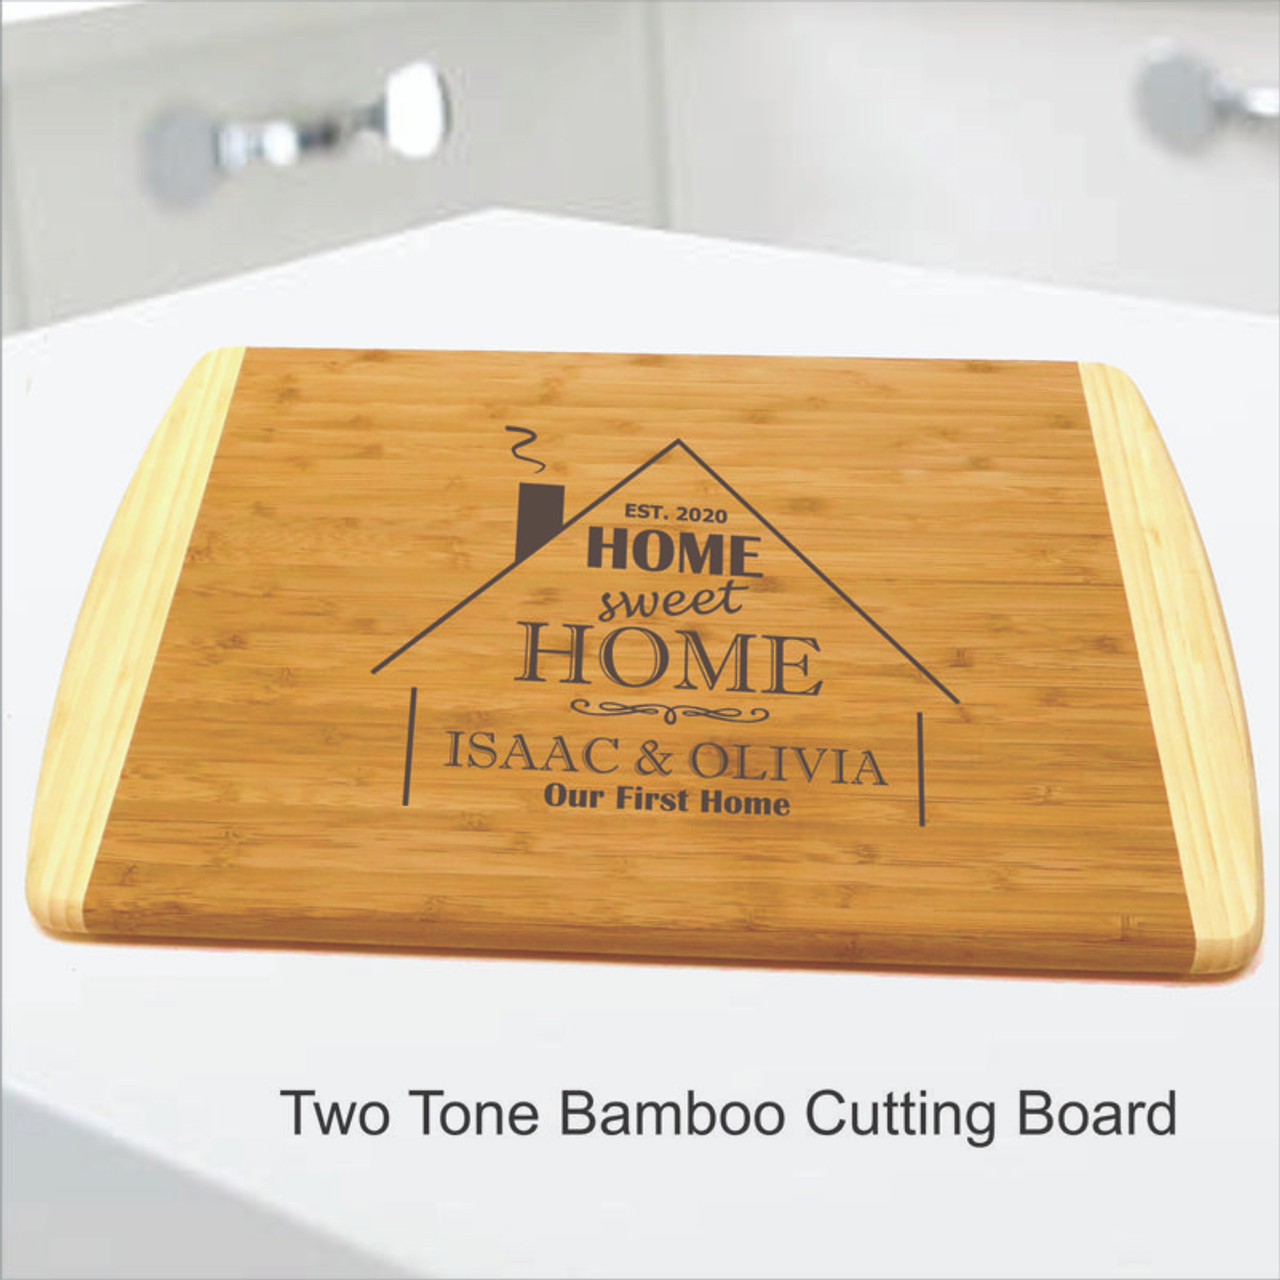 https://cdn11.bigcommerce.com/s-37bd3/images/stencil/1280x1280/products/168/1389/Bamboo_Cutting_Board_-_Home_Sweet_Home_100_dpi__68044.1582905247.jpg?c=2